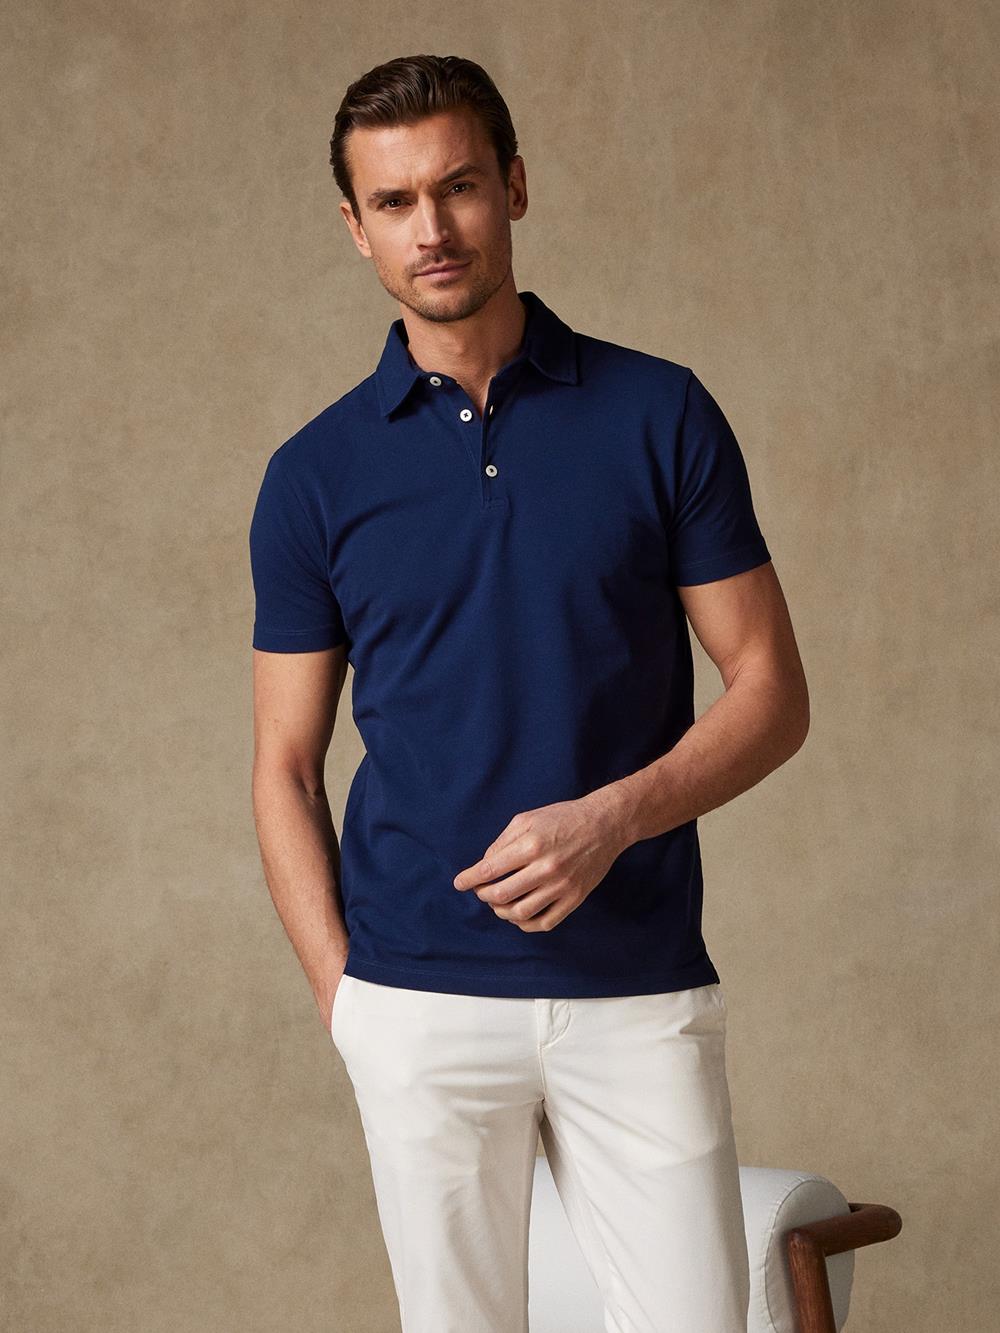 Heritage Polo in navy pique